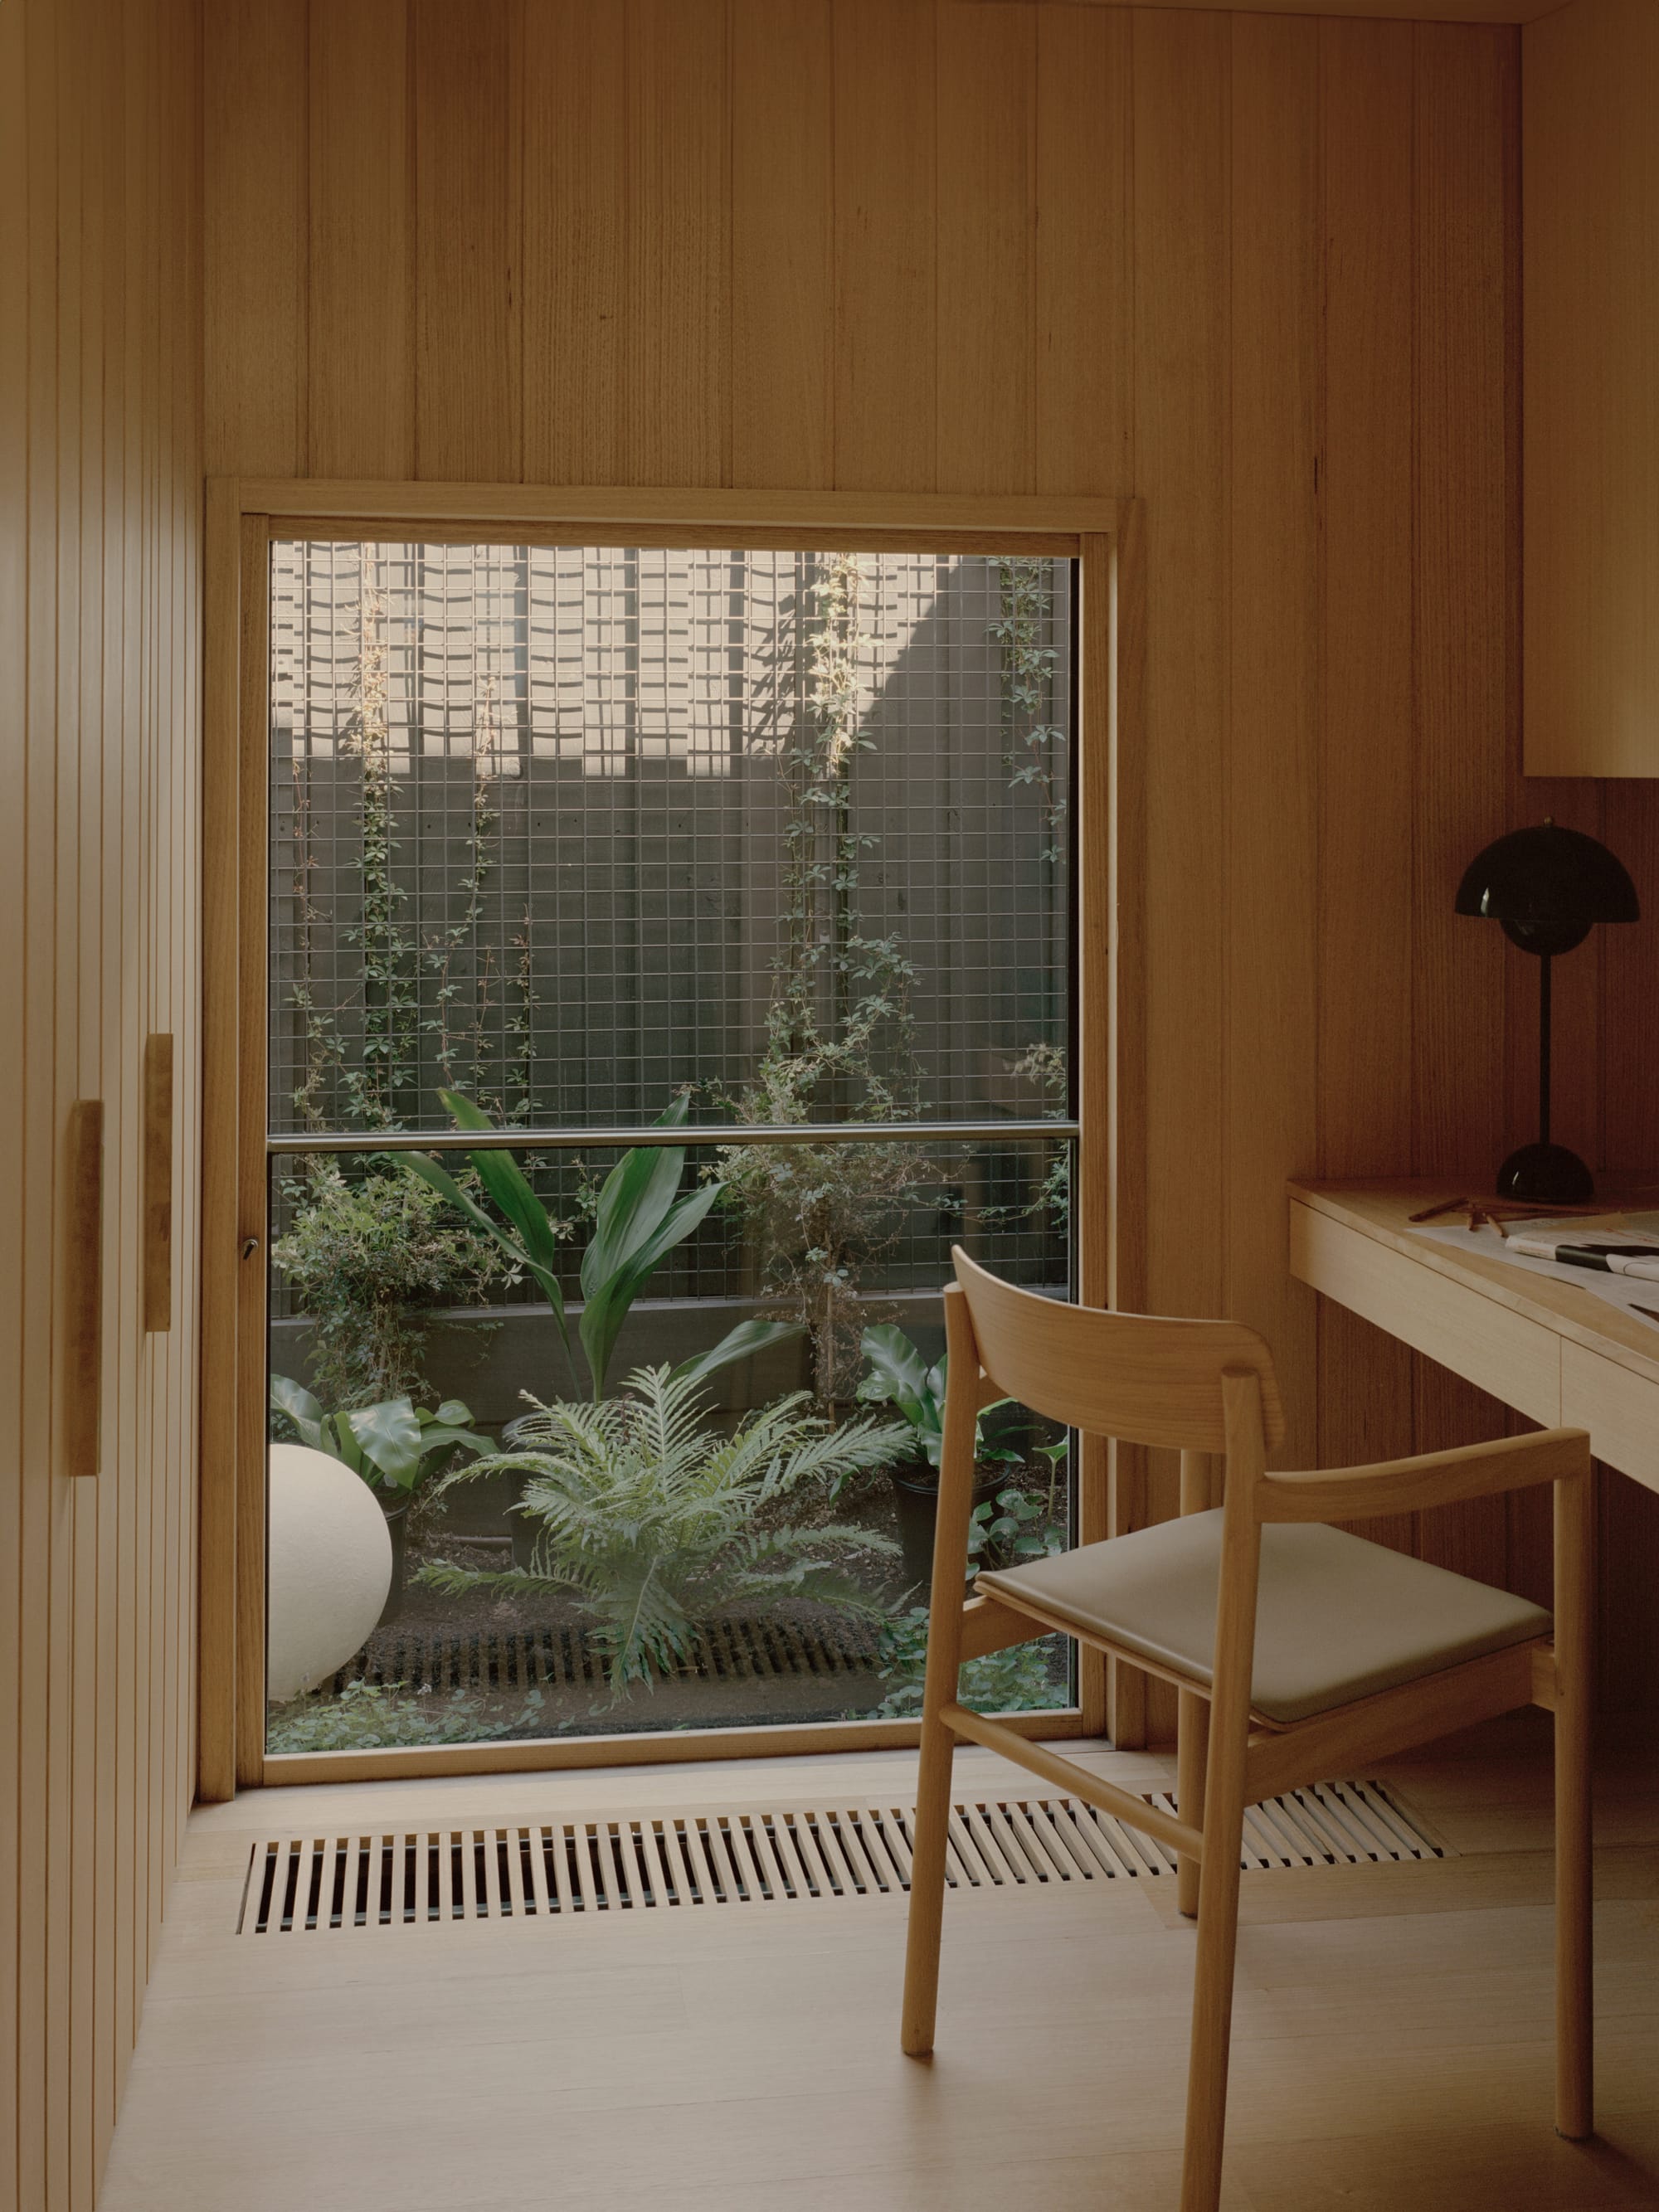 Gable Park by Weaver+Co Architects. Photography by Tasha Tylee. Study in residential home with timber clad walls and floors. Integrated timber desk with mid-century modern timber chair. Window looks onto lush courtyard garden.